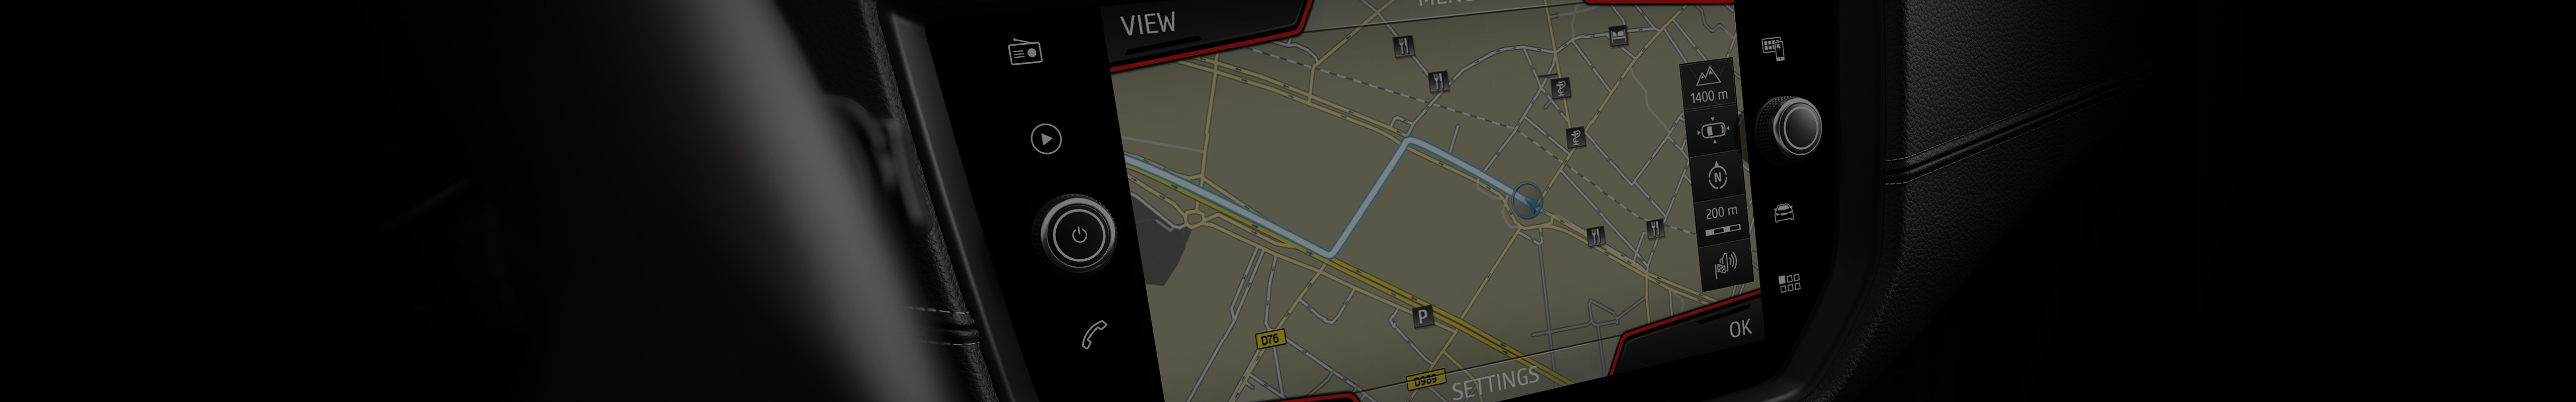 SEAT Navi System car map updates - generic map view dashboard orange outline